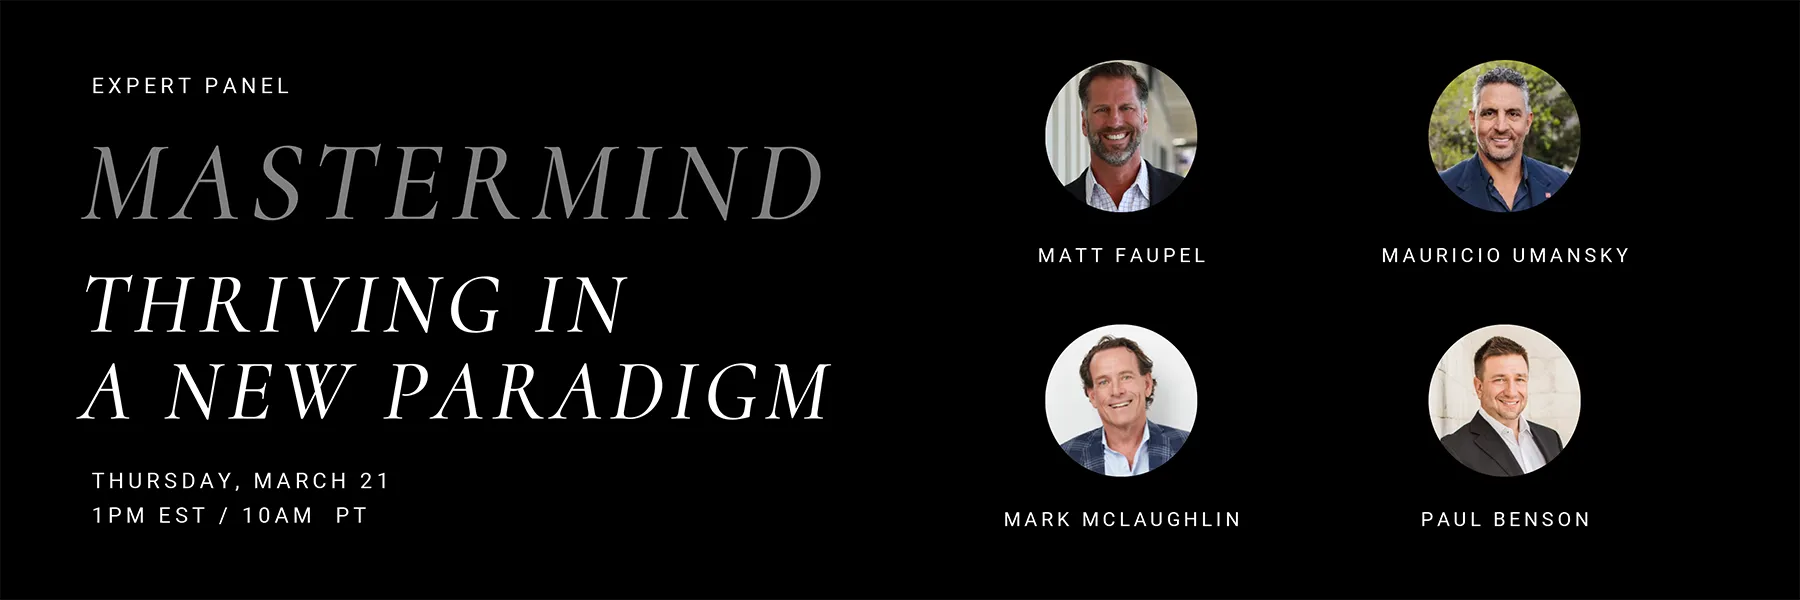 Mastermind | Thriving in a New Paradigm